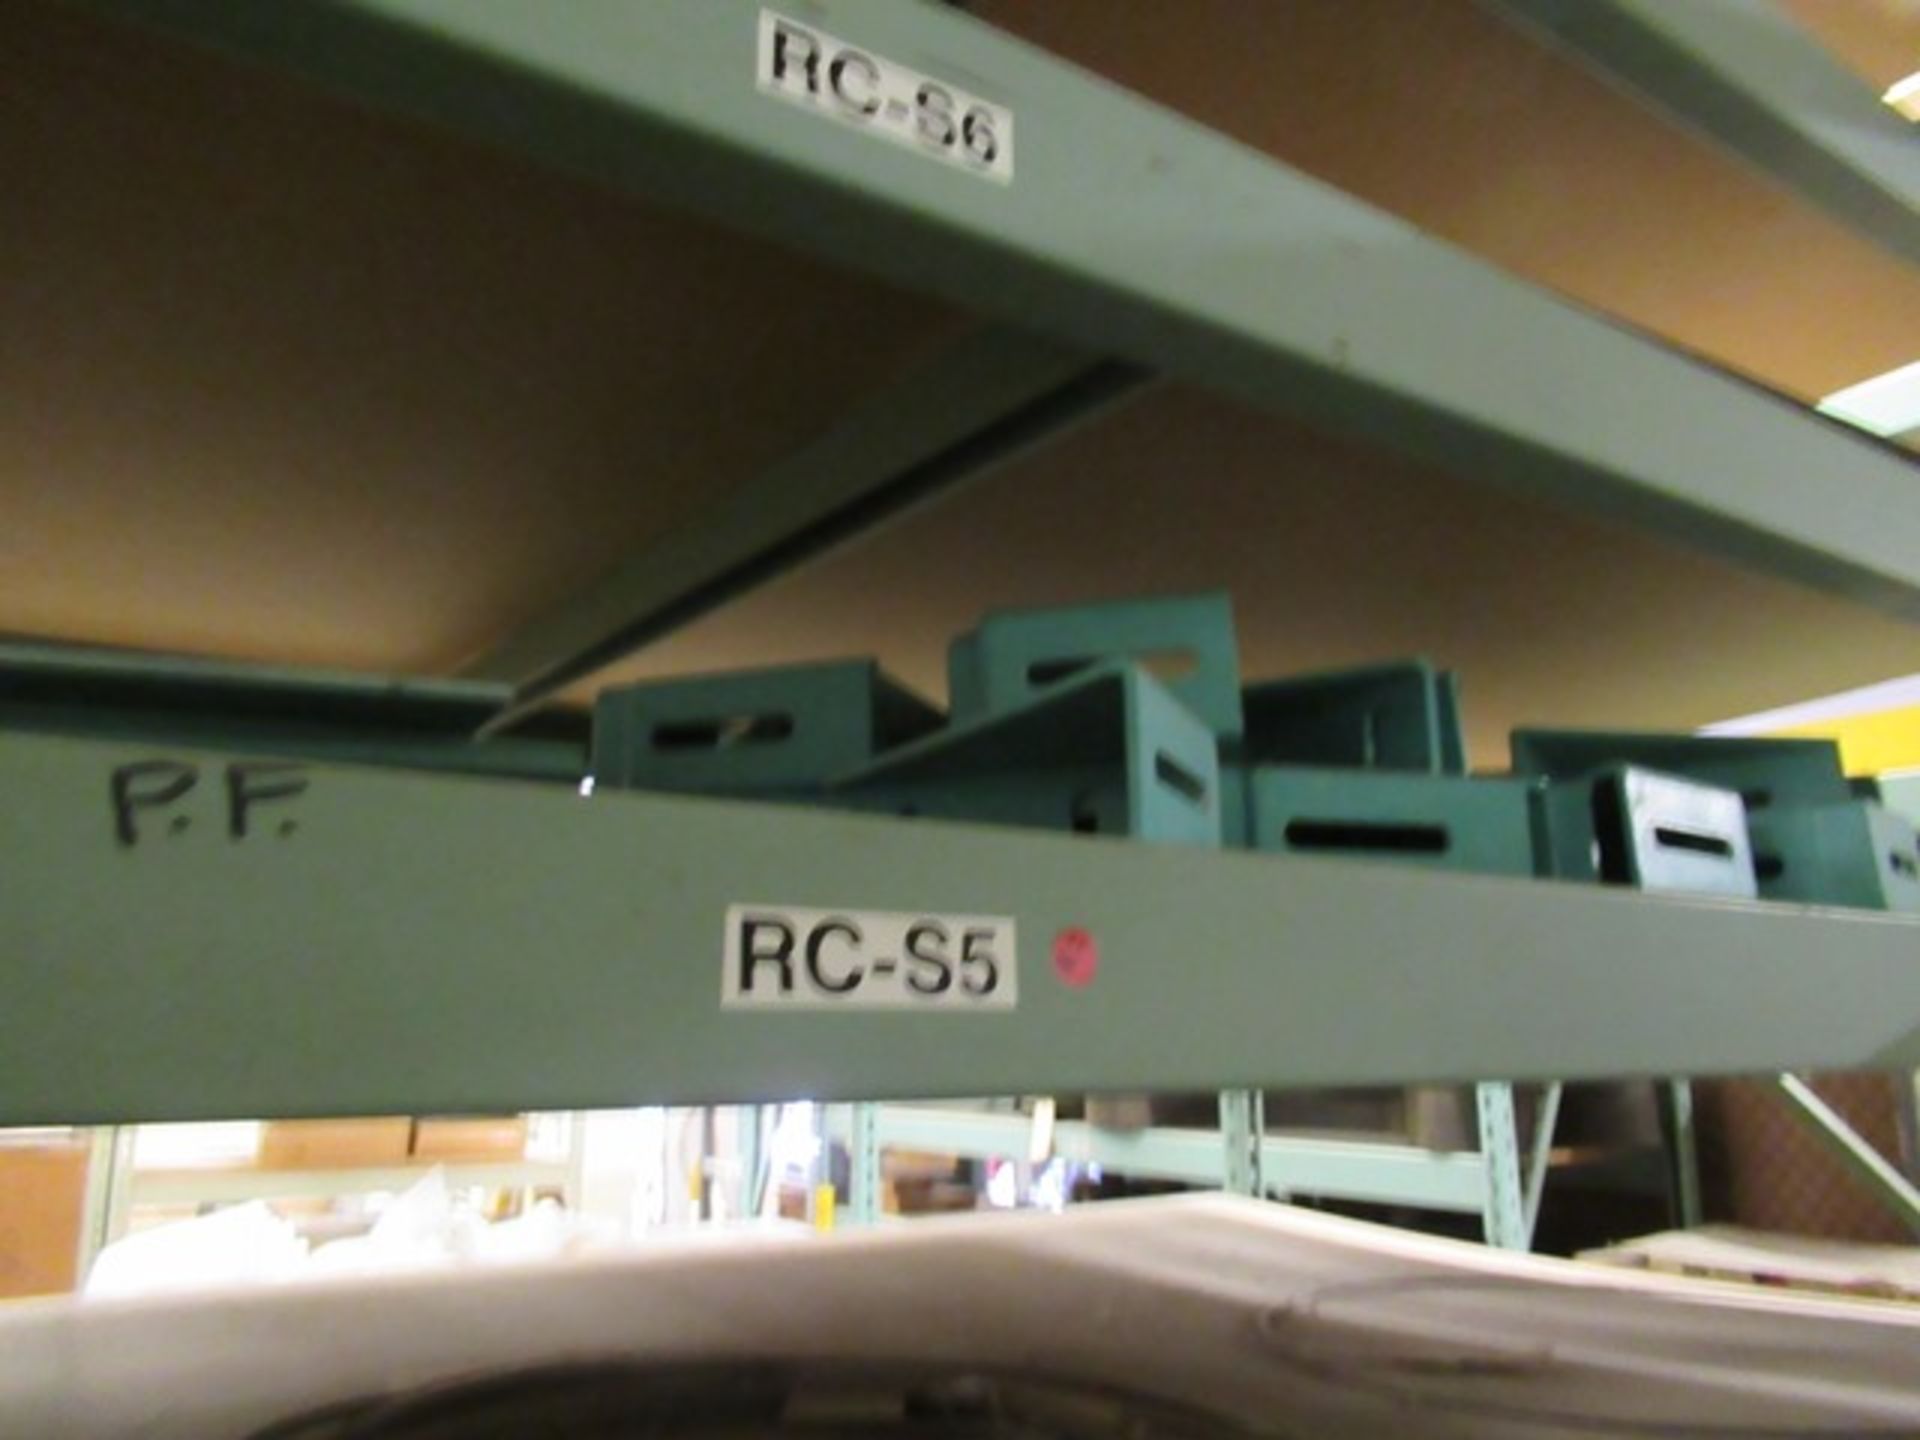 LOT ASST. FILTERS, BAGS, COUPLINGS, ETC. 4 SHELVES ON RACK ONLY (M-S) - Image 7 of 7